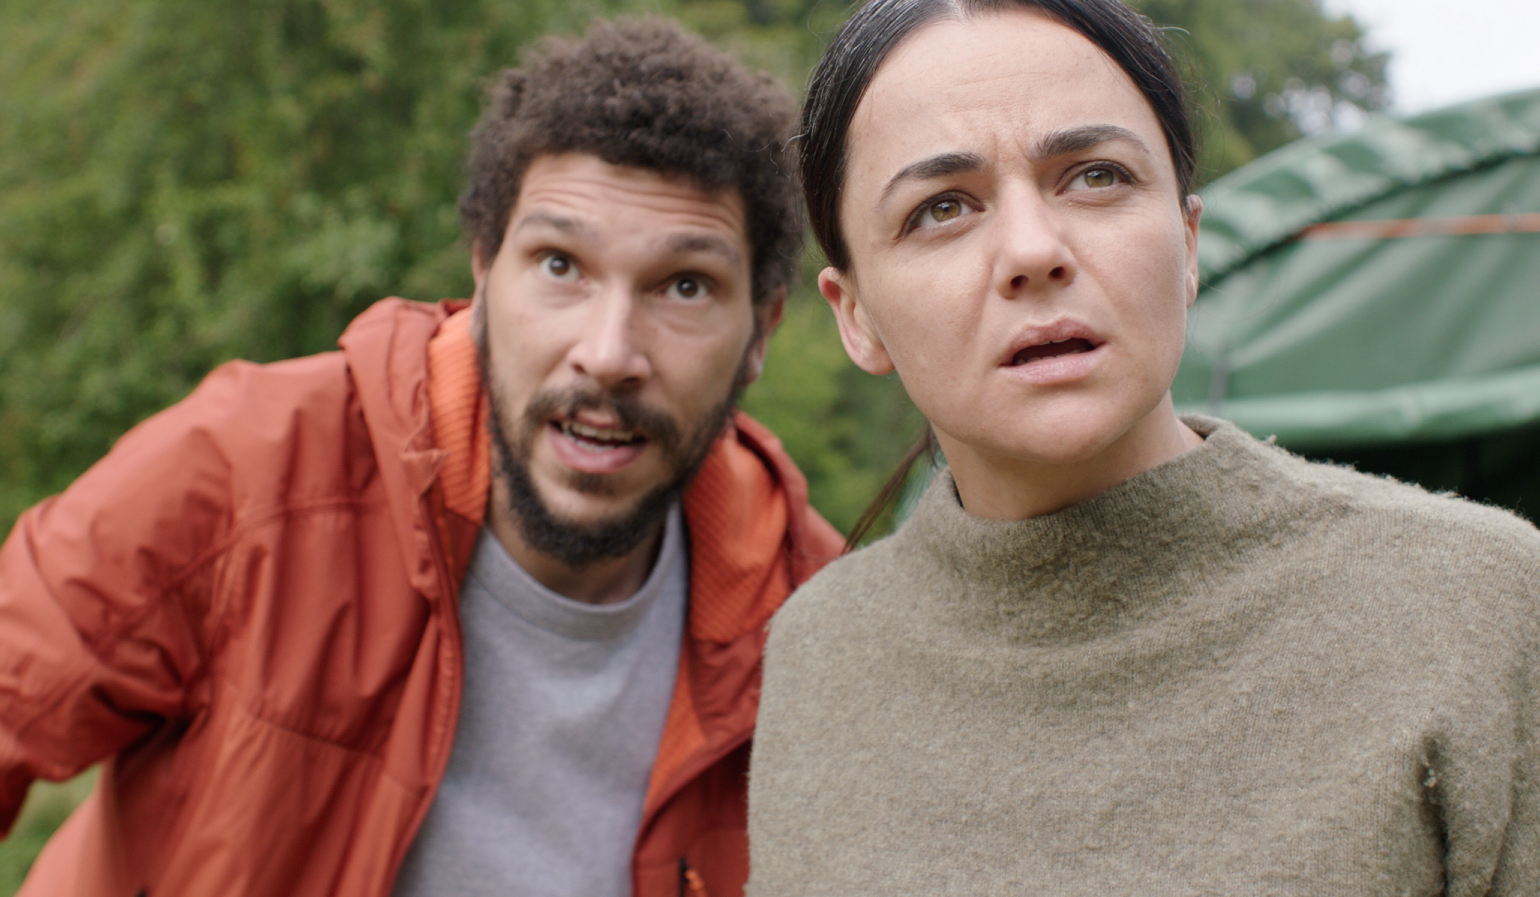 Martin Lowery (Joel Fry) and Dr. Wendle (Hayley Squires) witness something alarming in In the Earth. (Photo: Neon)